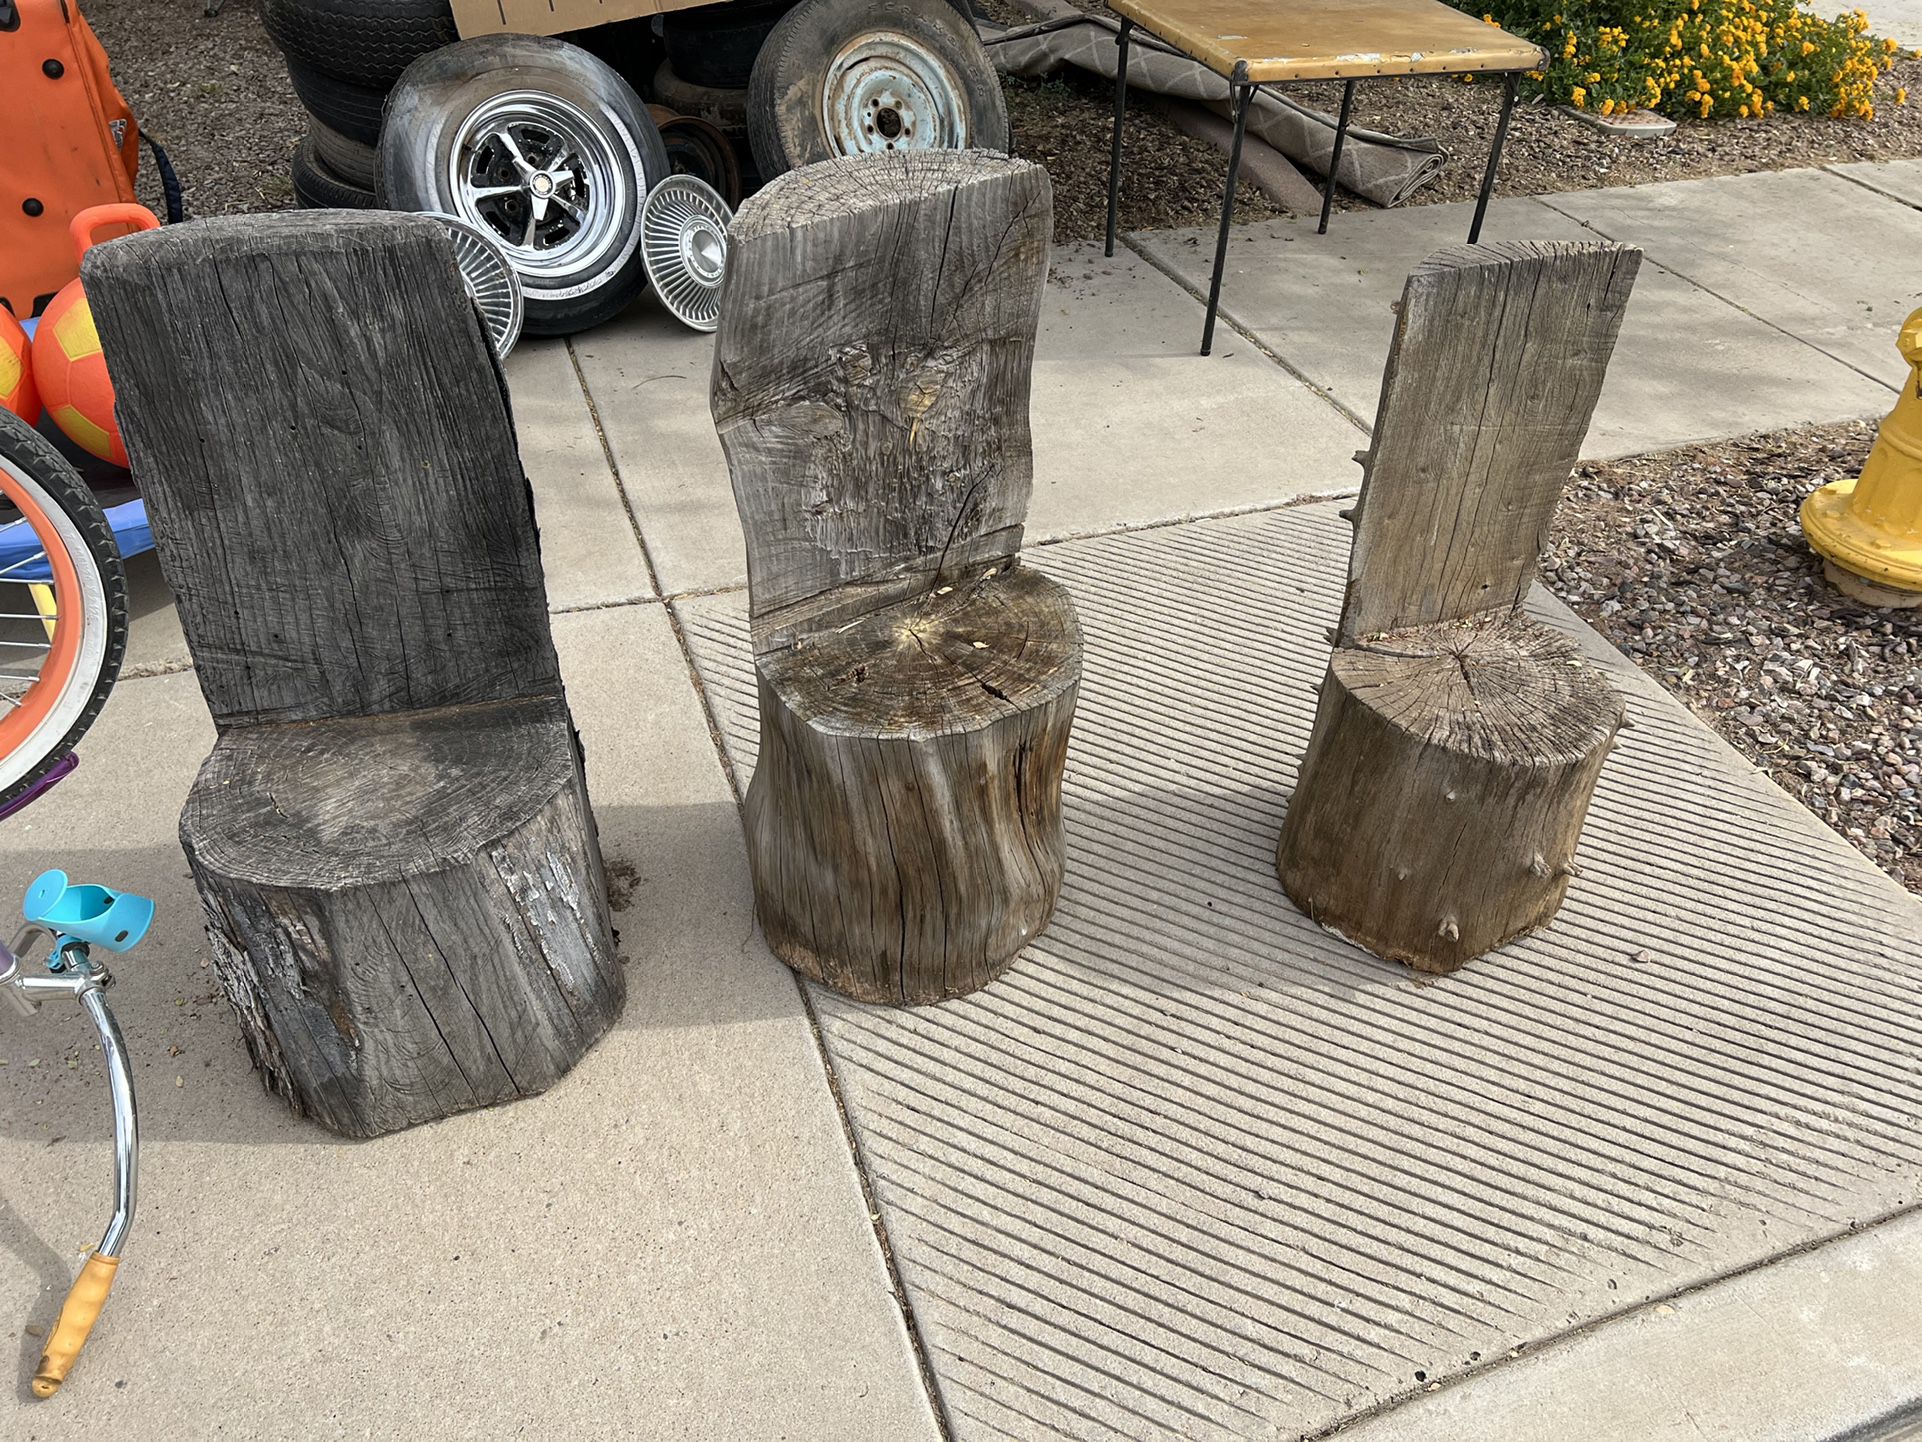 Solid Wood Stump Chairs! Super Cool! Great For Outside Seating! $15.00/each OBO!